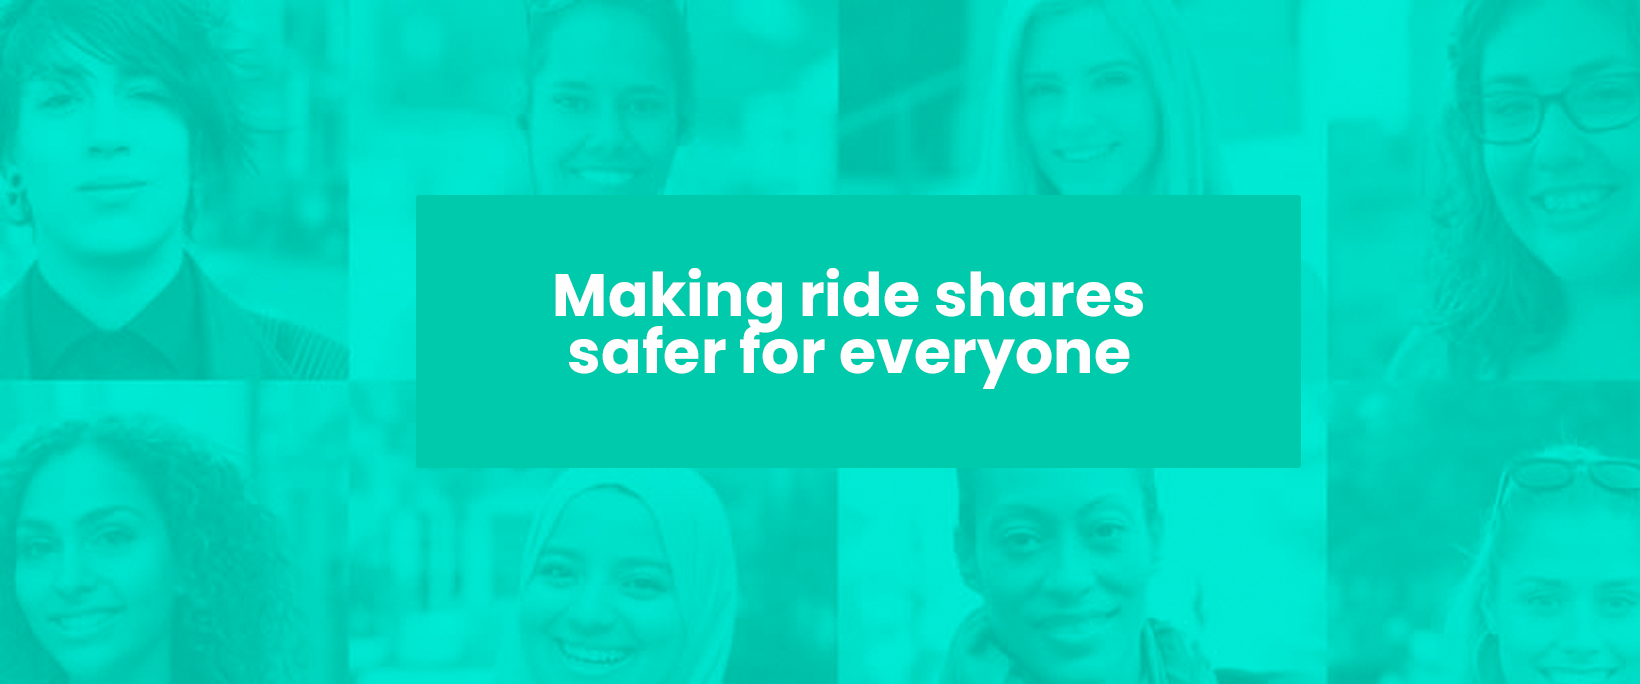 Making ride shares safer for everyone